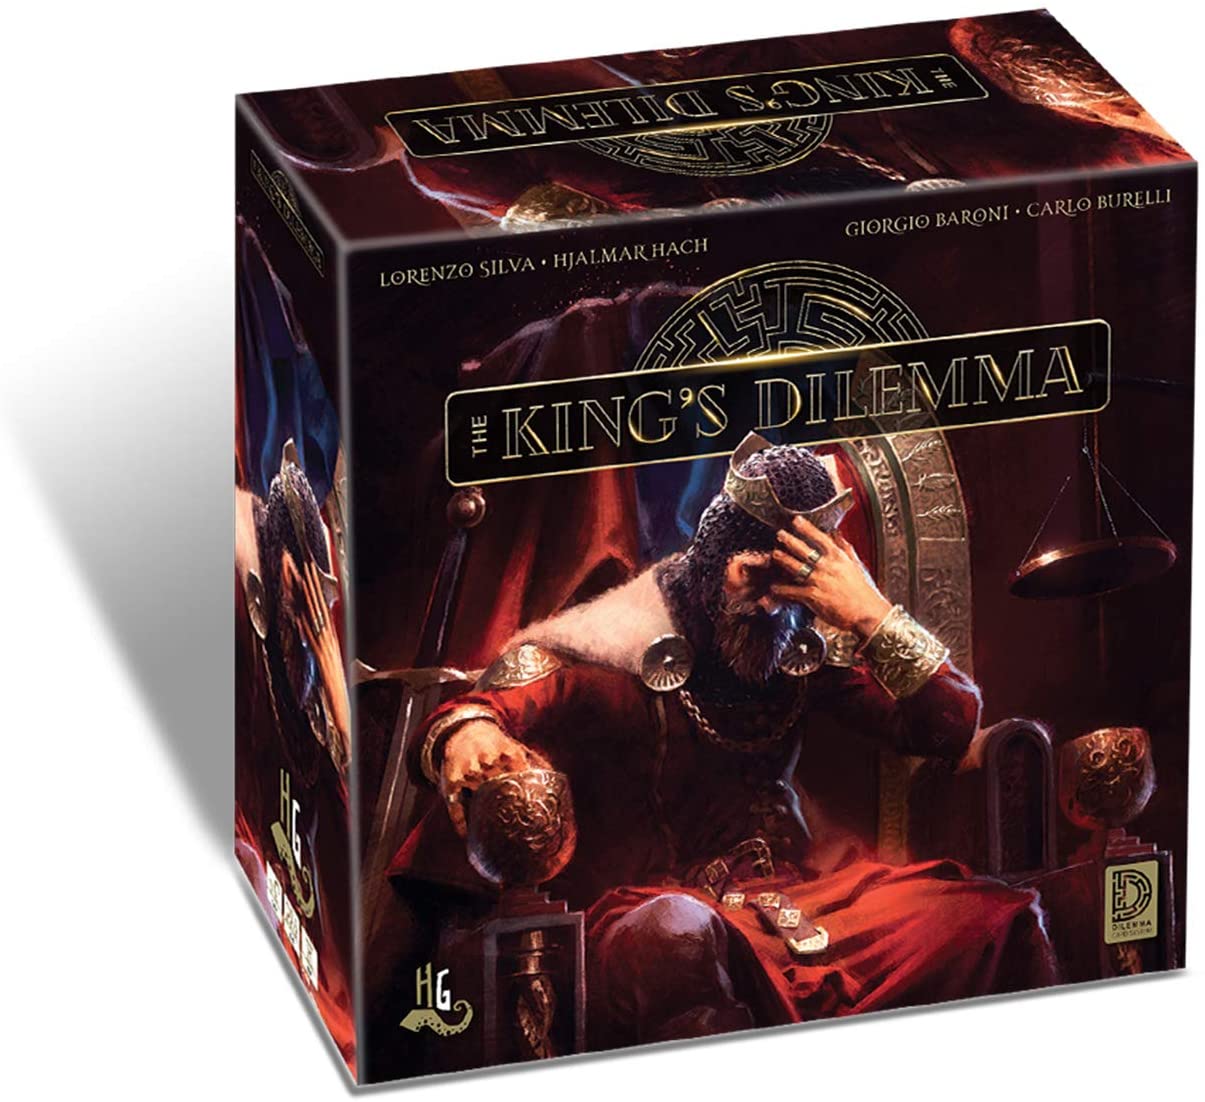 (BSG Certified USED) The King's Dilemma